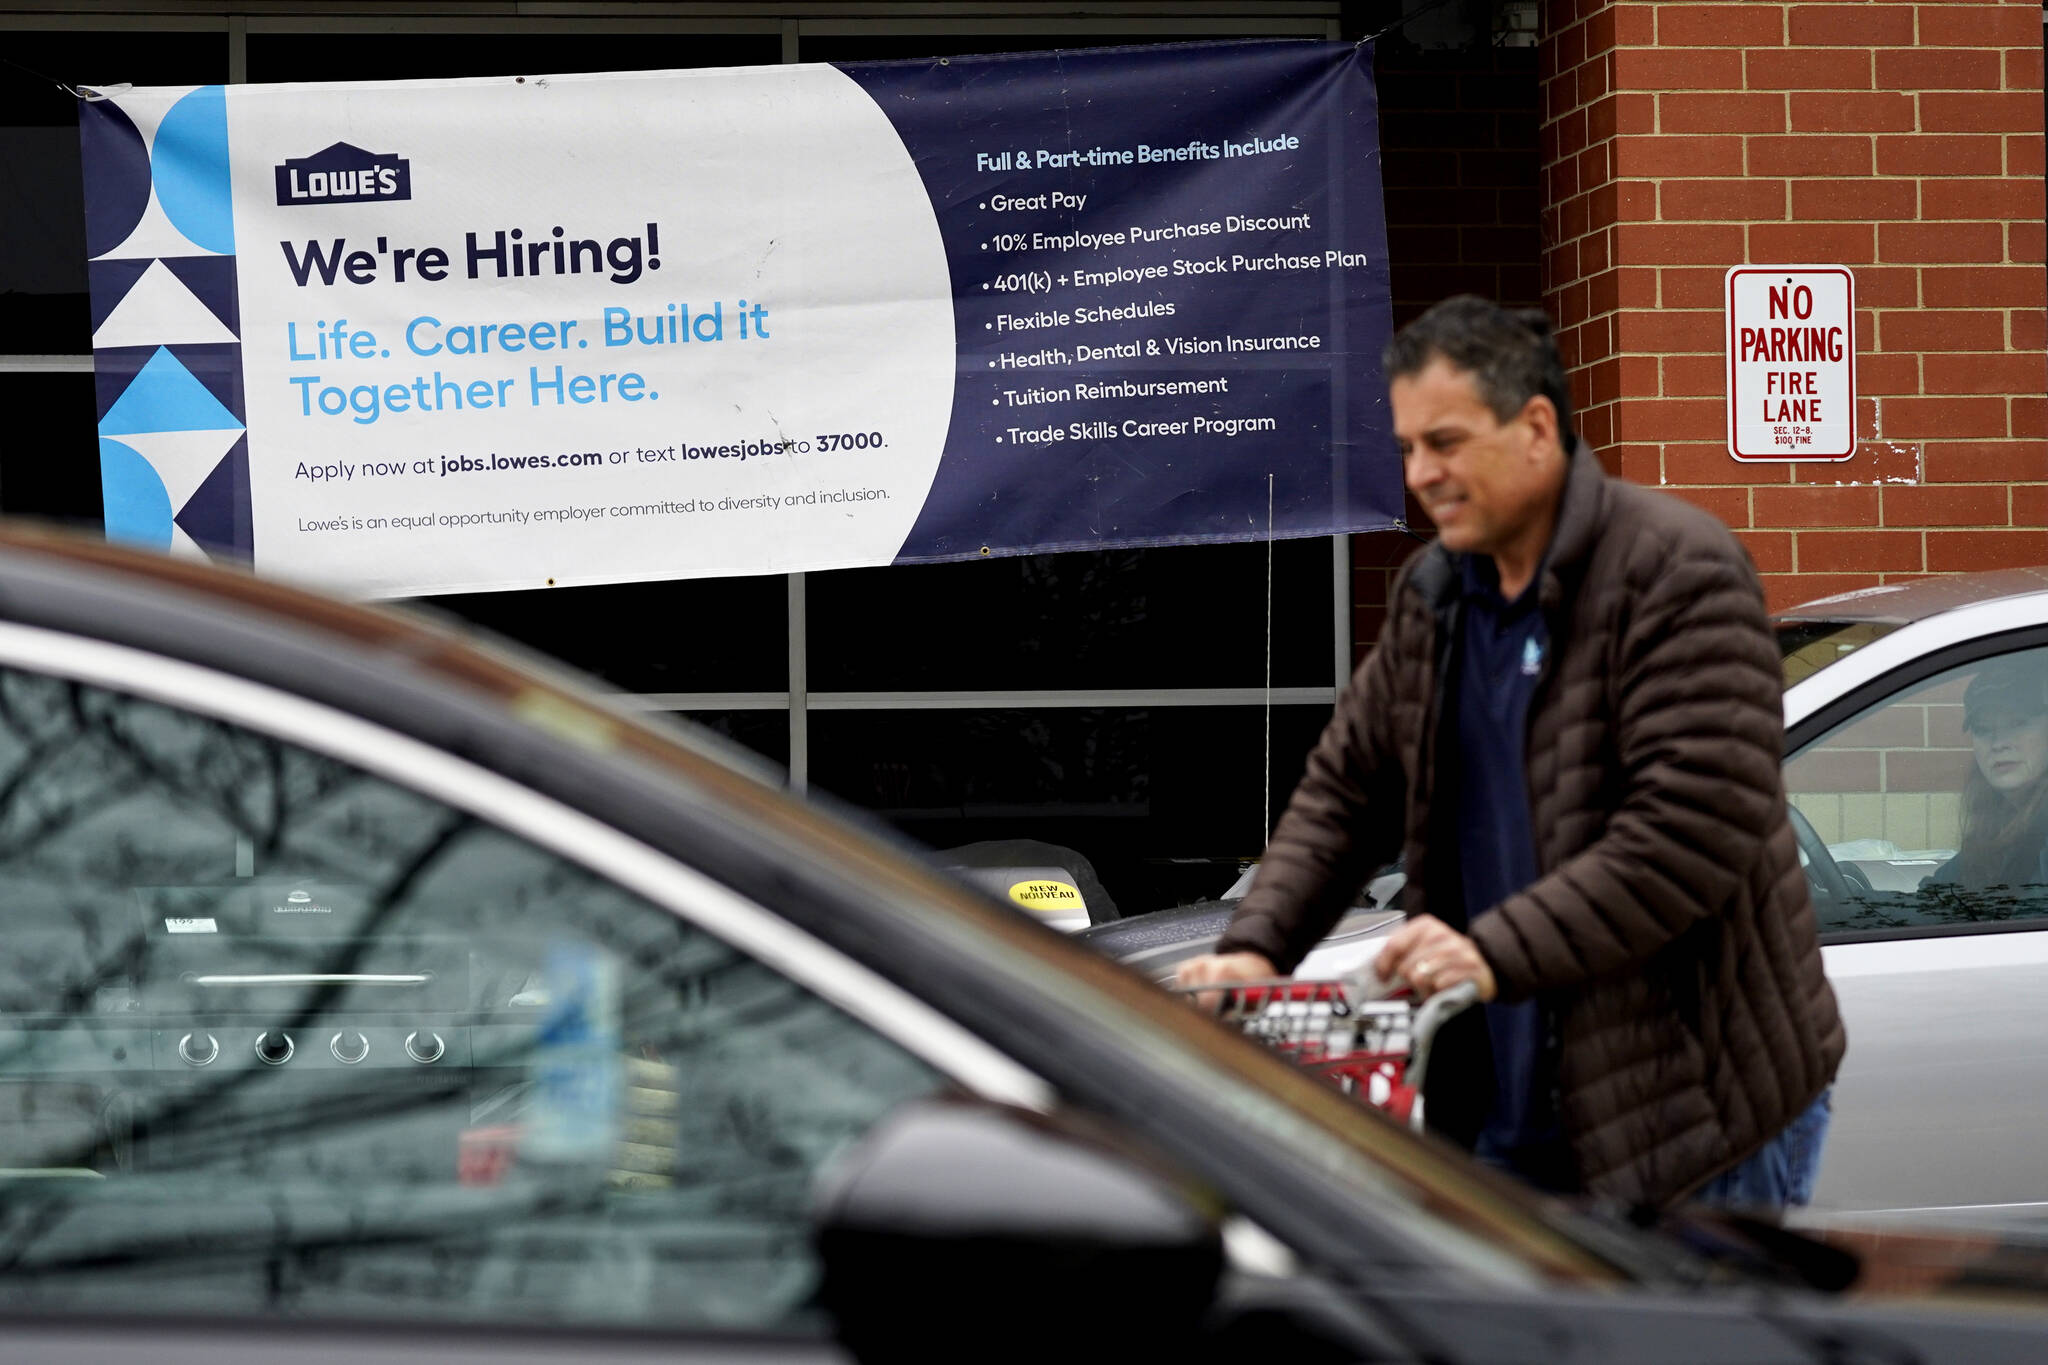 A hiring sign is displayed at a home improvement store in Northbrook, Ill., Thursday, May 5, 2022. America’s employers added 428,000 jobs in April, extending a streak of solid hiring that has defied punishing inflation, chronic supply shortages, the Russian war against Ukraine and much higher borrowing costs. (AP Photo / Nam Y. Huh)